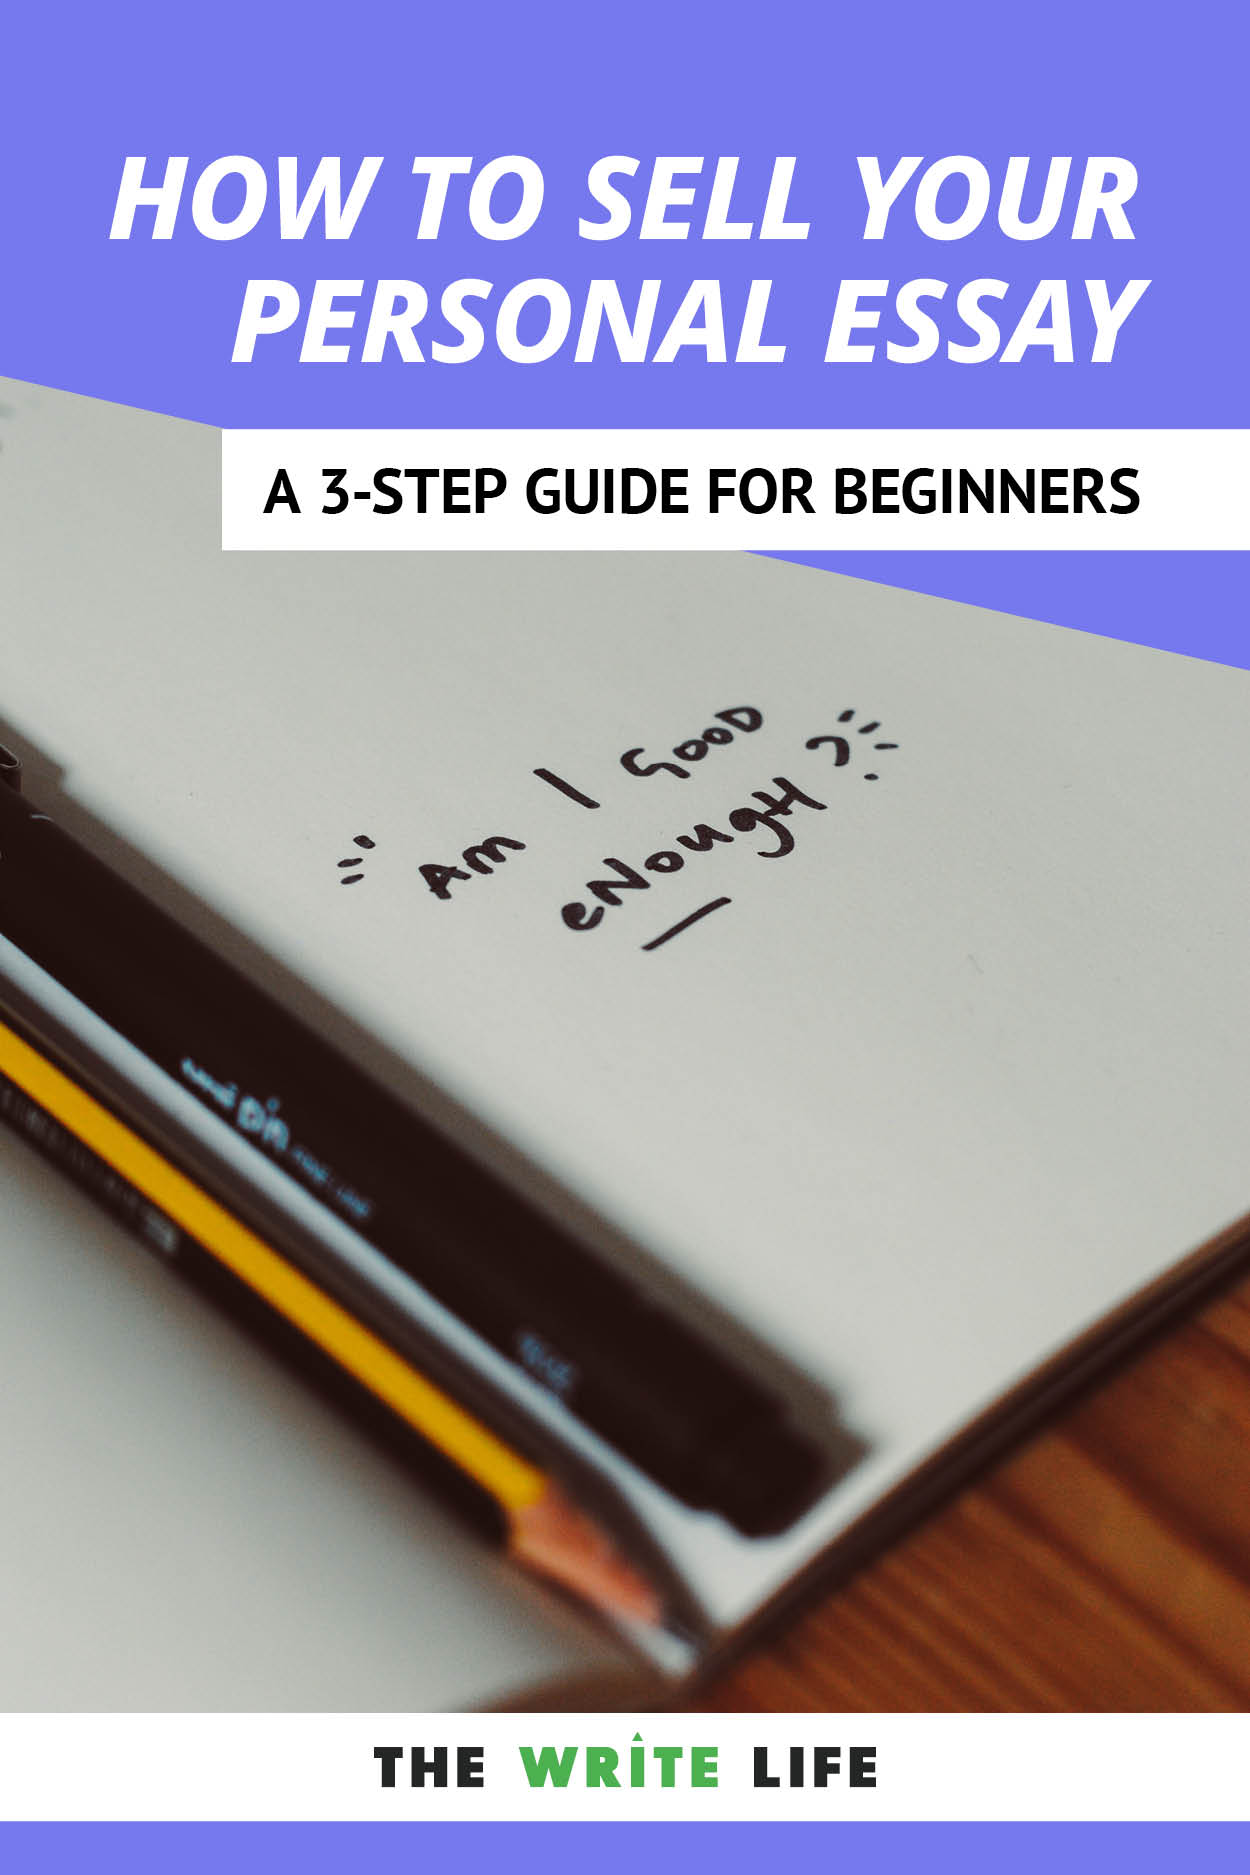 how to write an essay selling yourself